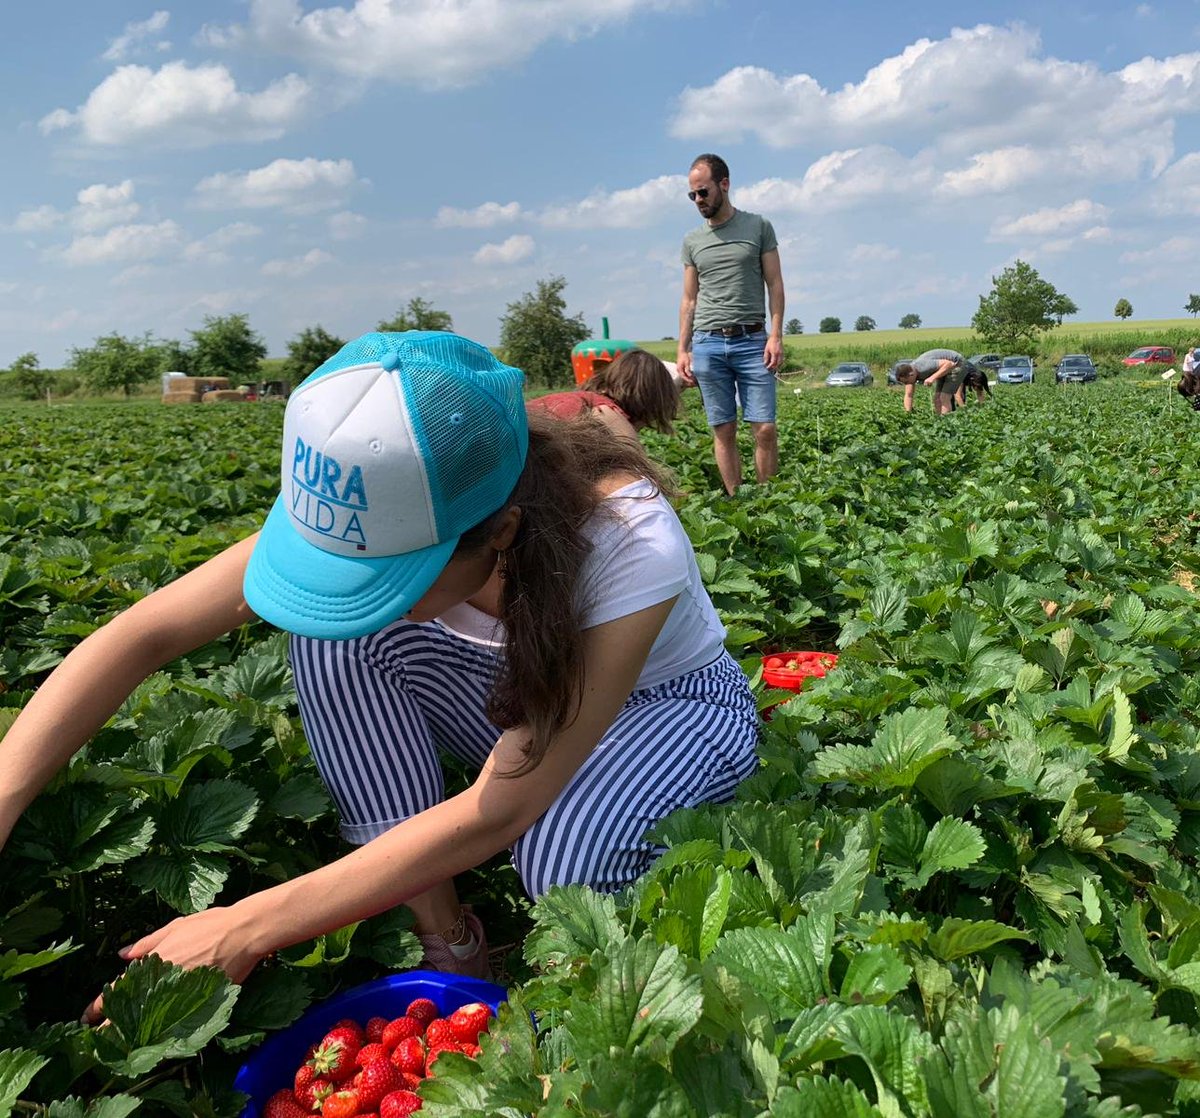 Today we took @BrinkmannLab to the #strawberry field! 🍓 This was also #teamwork 😎 
#labmates #friends #scienceandfun